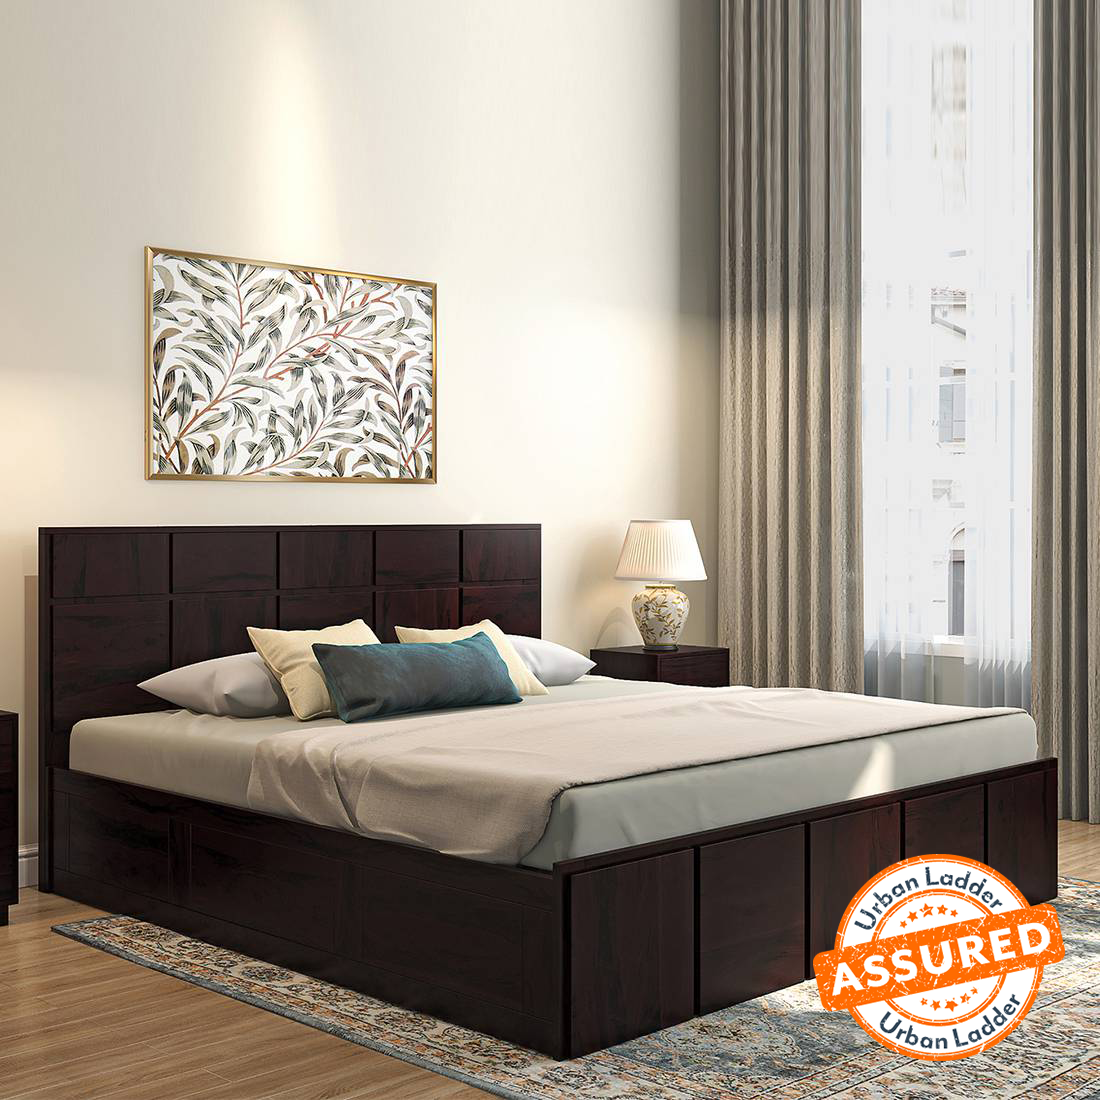 Up to 70% off on Storage Beds | Full House Sale - Urban Ladder